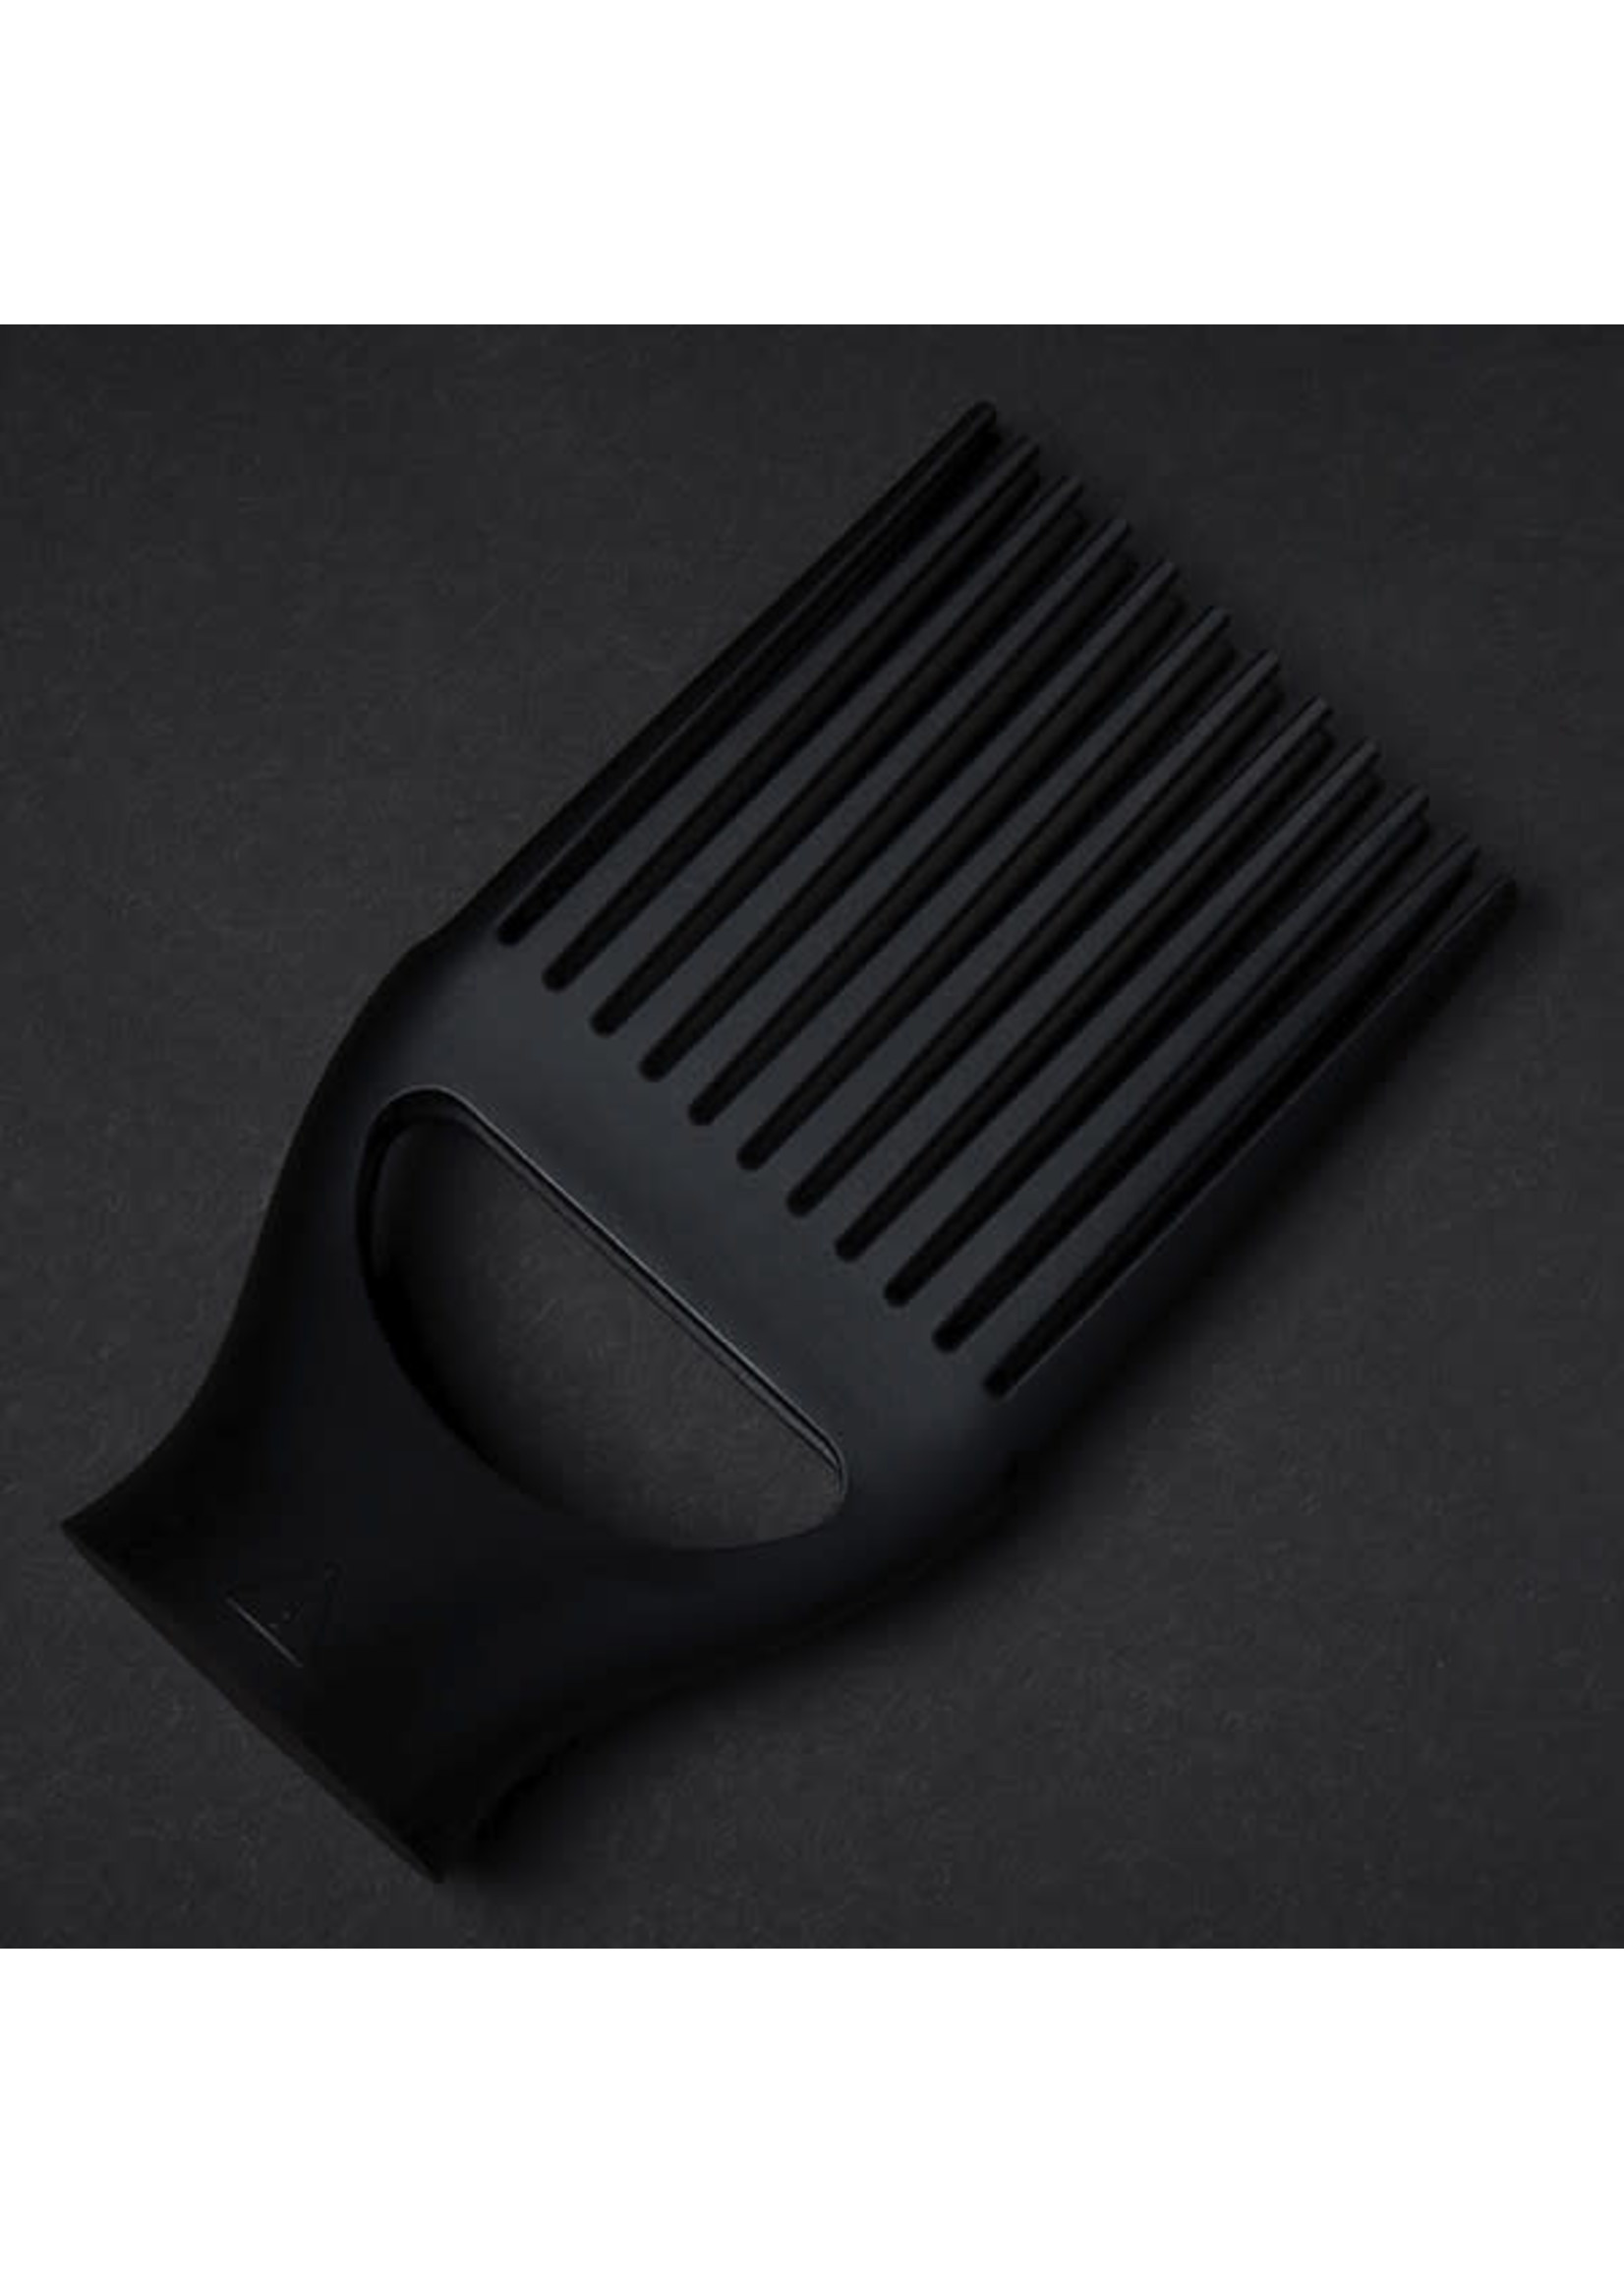 GHD GHD Professional Comb Nozzle